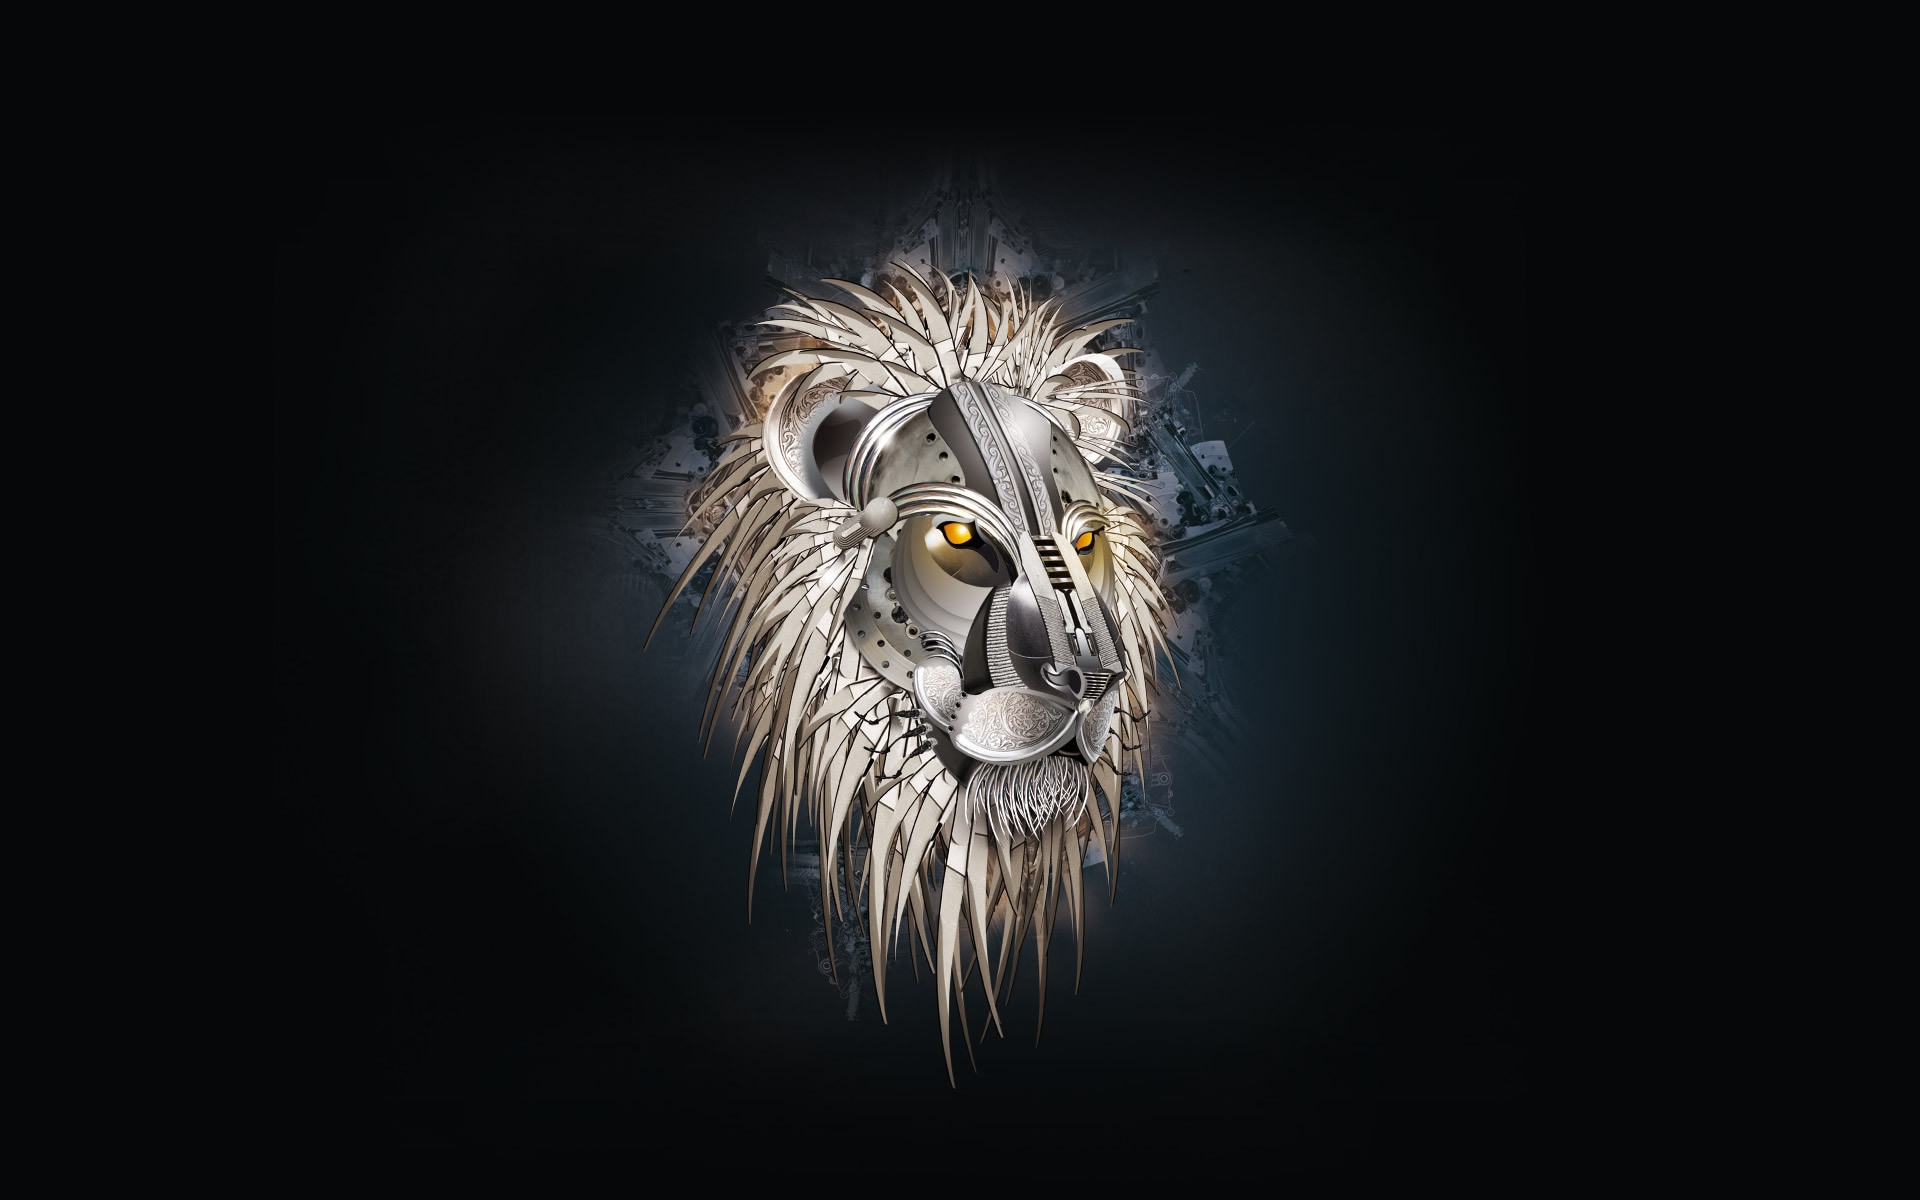 Lion head drawing for 1920 x 1200 widescreen resolution